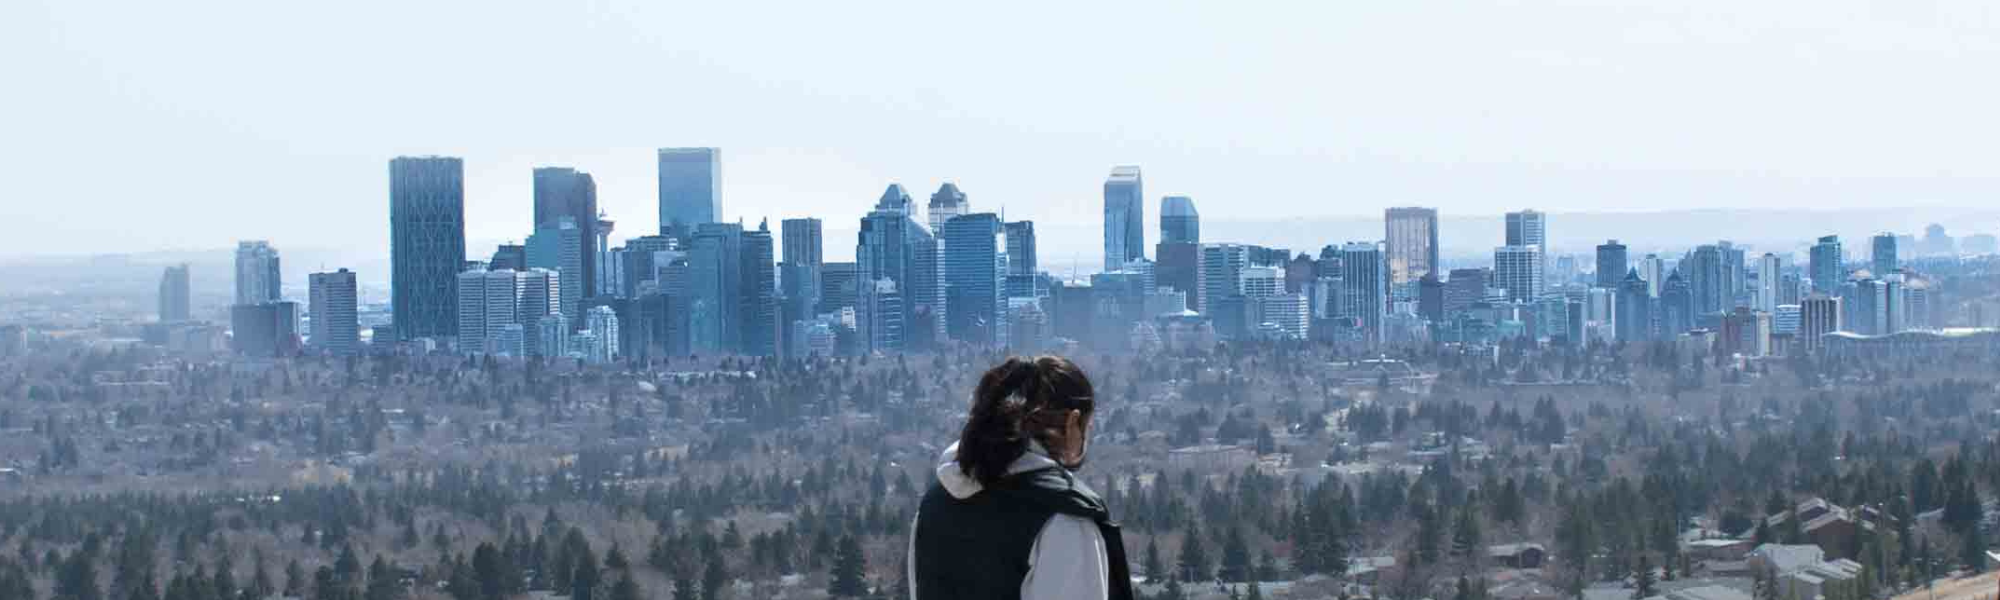 A member of YouQuest on a walk overlooking the city skyline in the Calgary community.